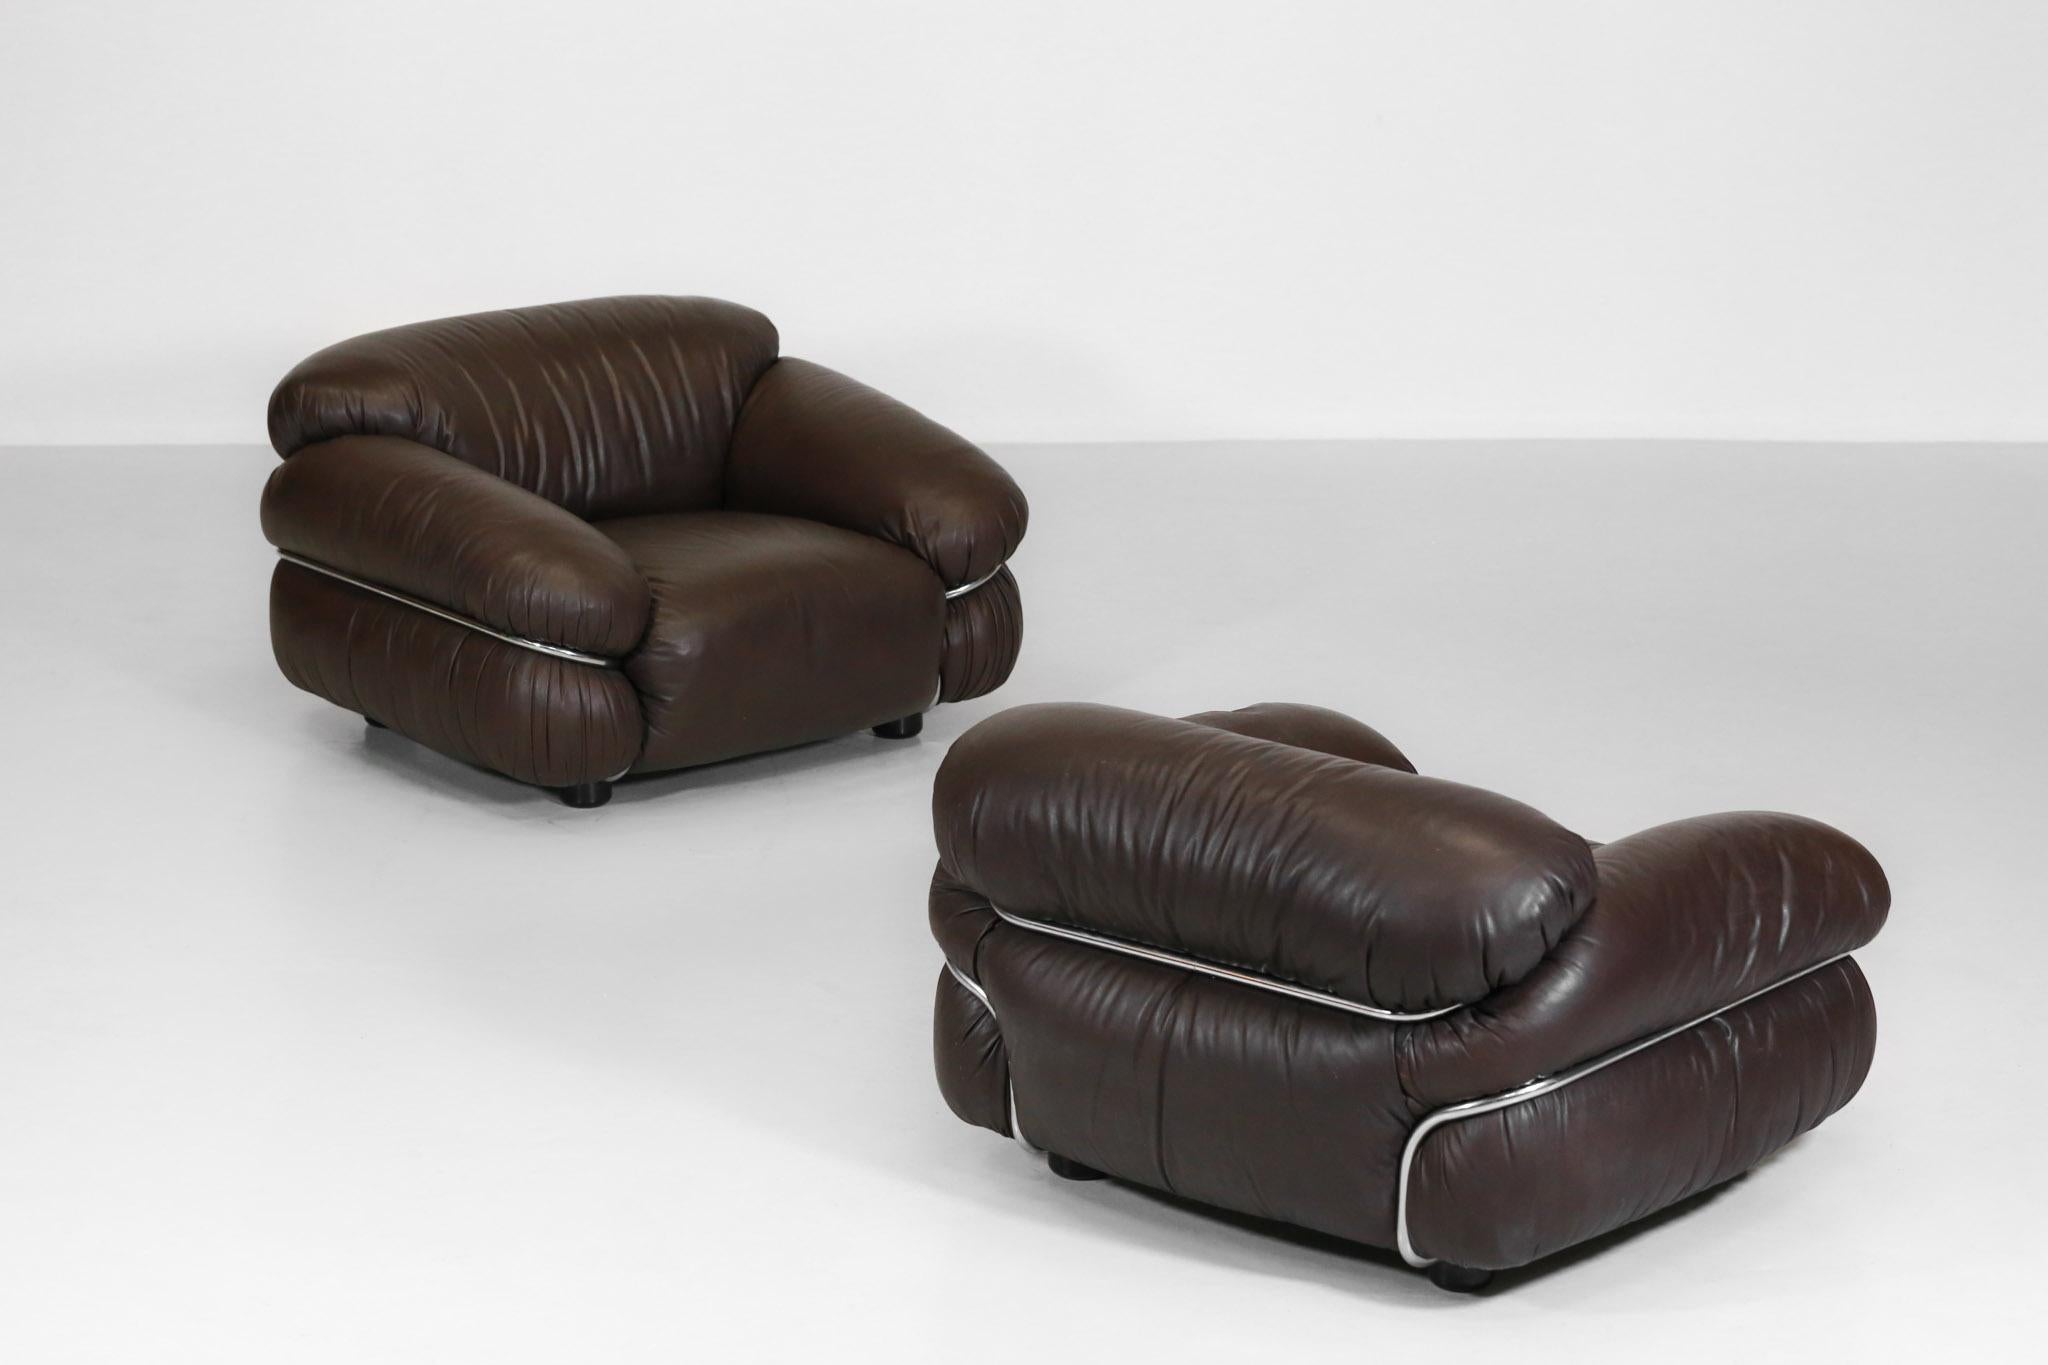 Pair of Sesann Armchairs by Gianfranco Fratinni in Leather for Cassina Italian For Sale 2